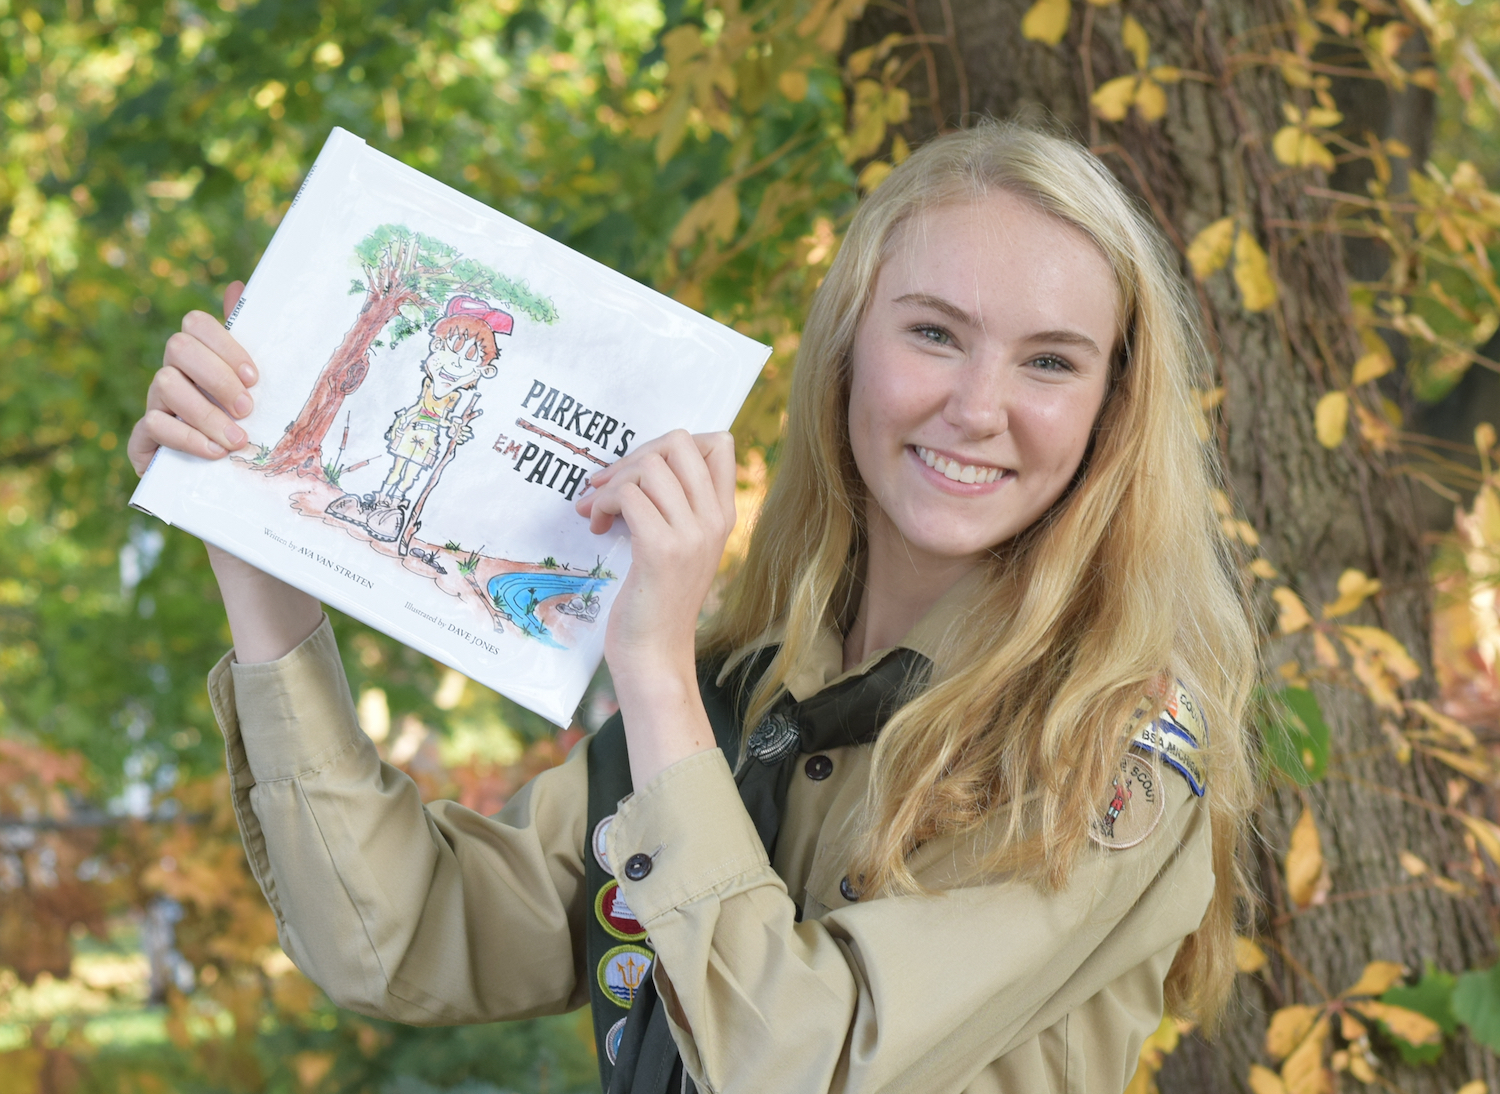 Ava Van Straten poses with the children's book she wrote for her Eagle Scout project